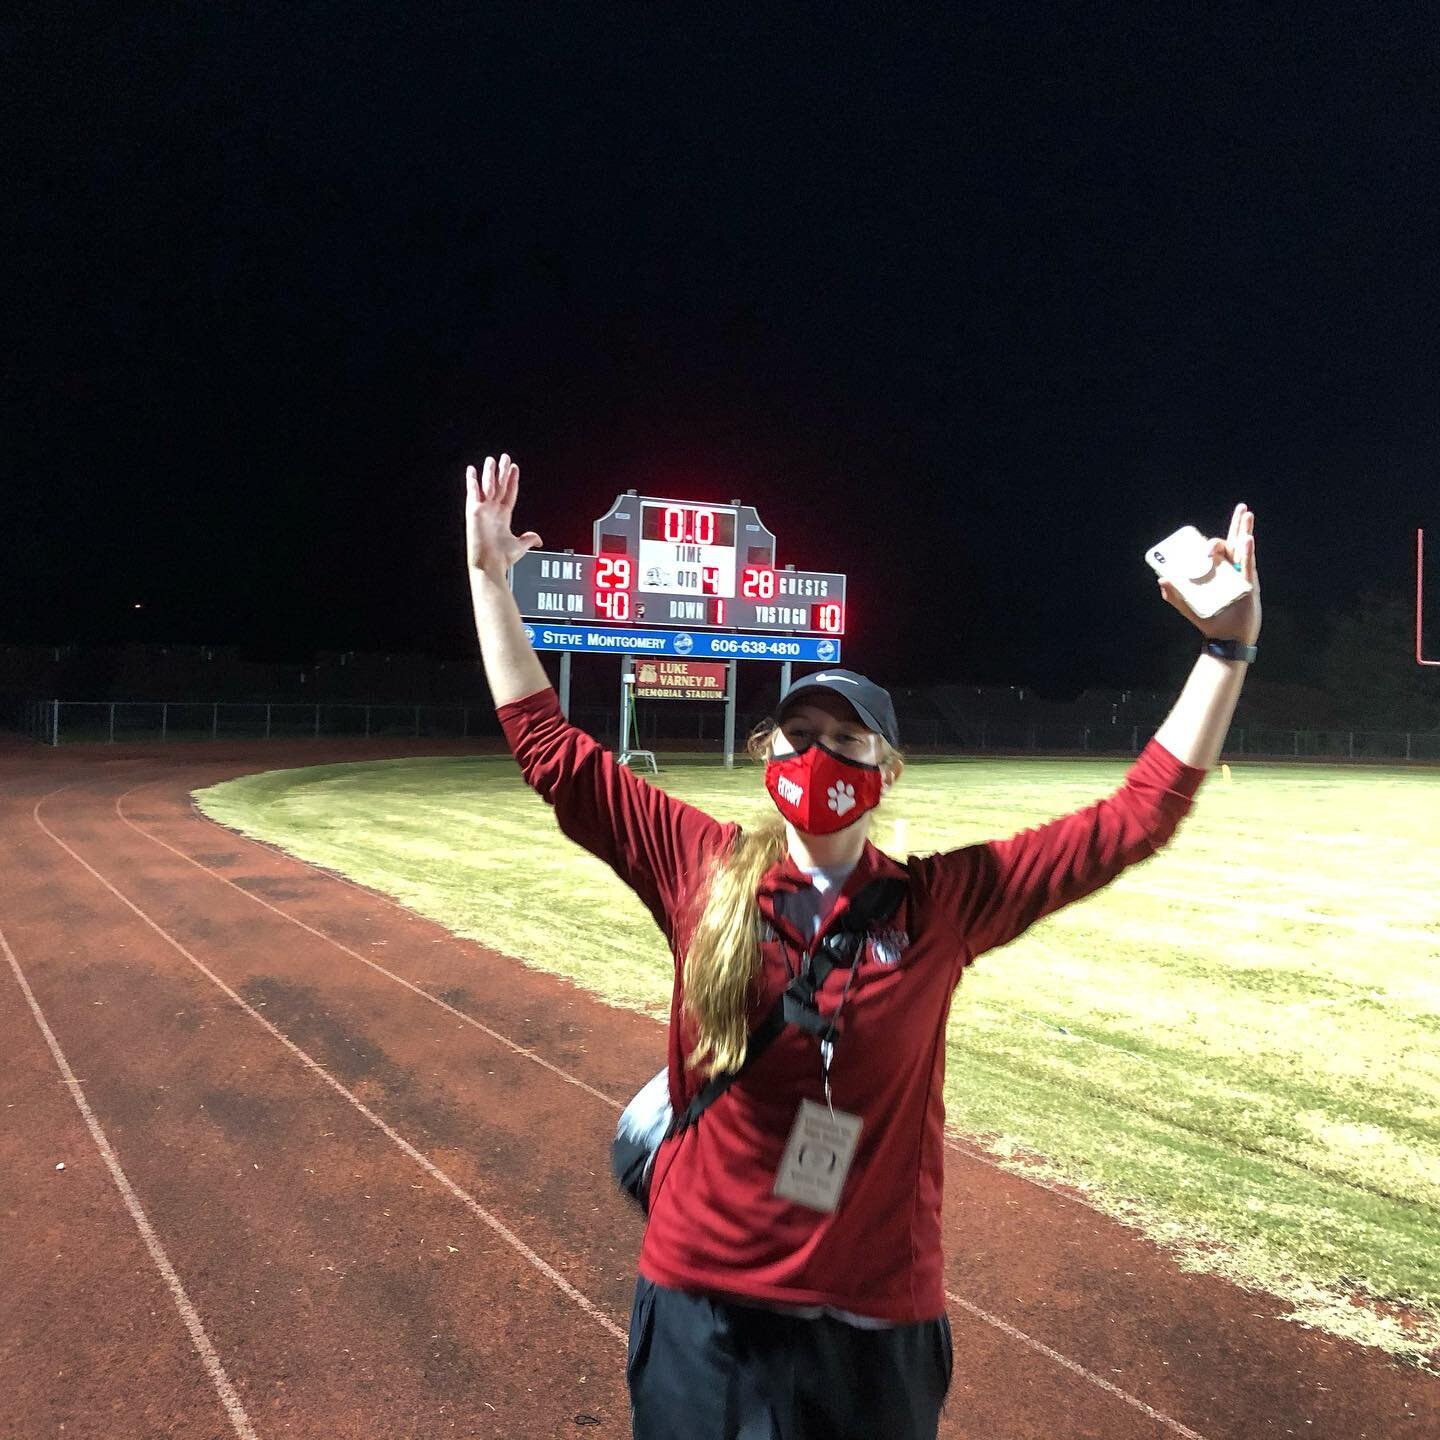 What a game!! Great win, Dawgs! Feels so right being back under those Friday night lights! #ekysopt #sportsphysicaltherapy #injurymanagement #sidelinecoverage